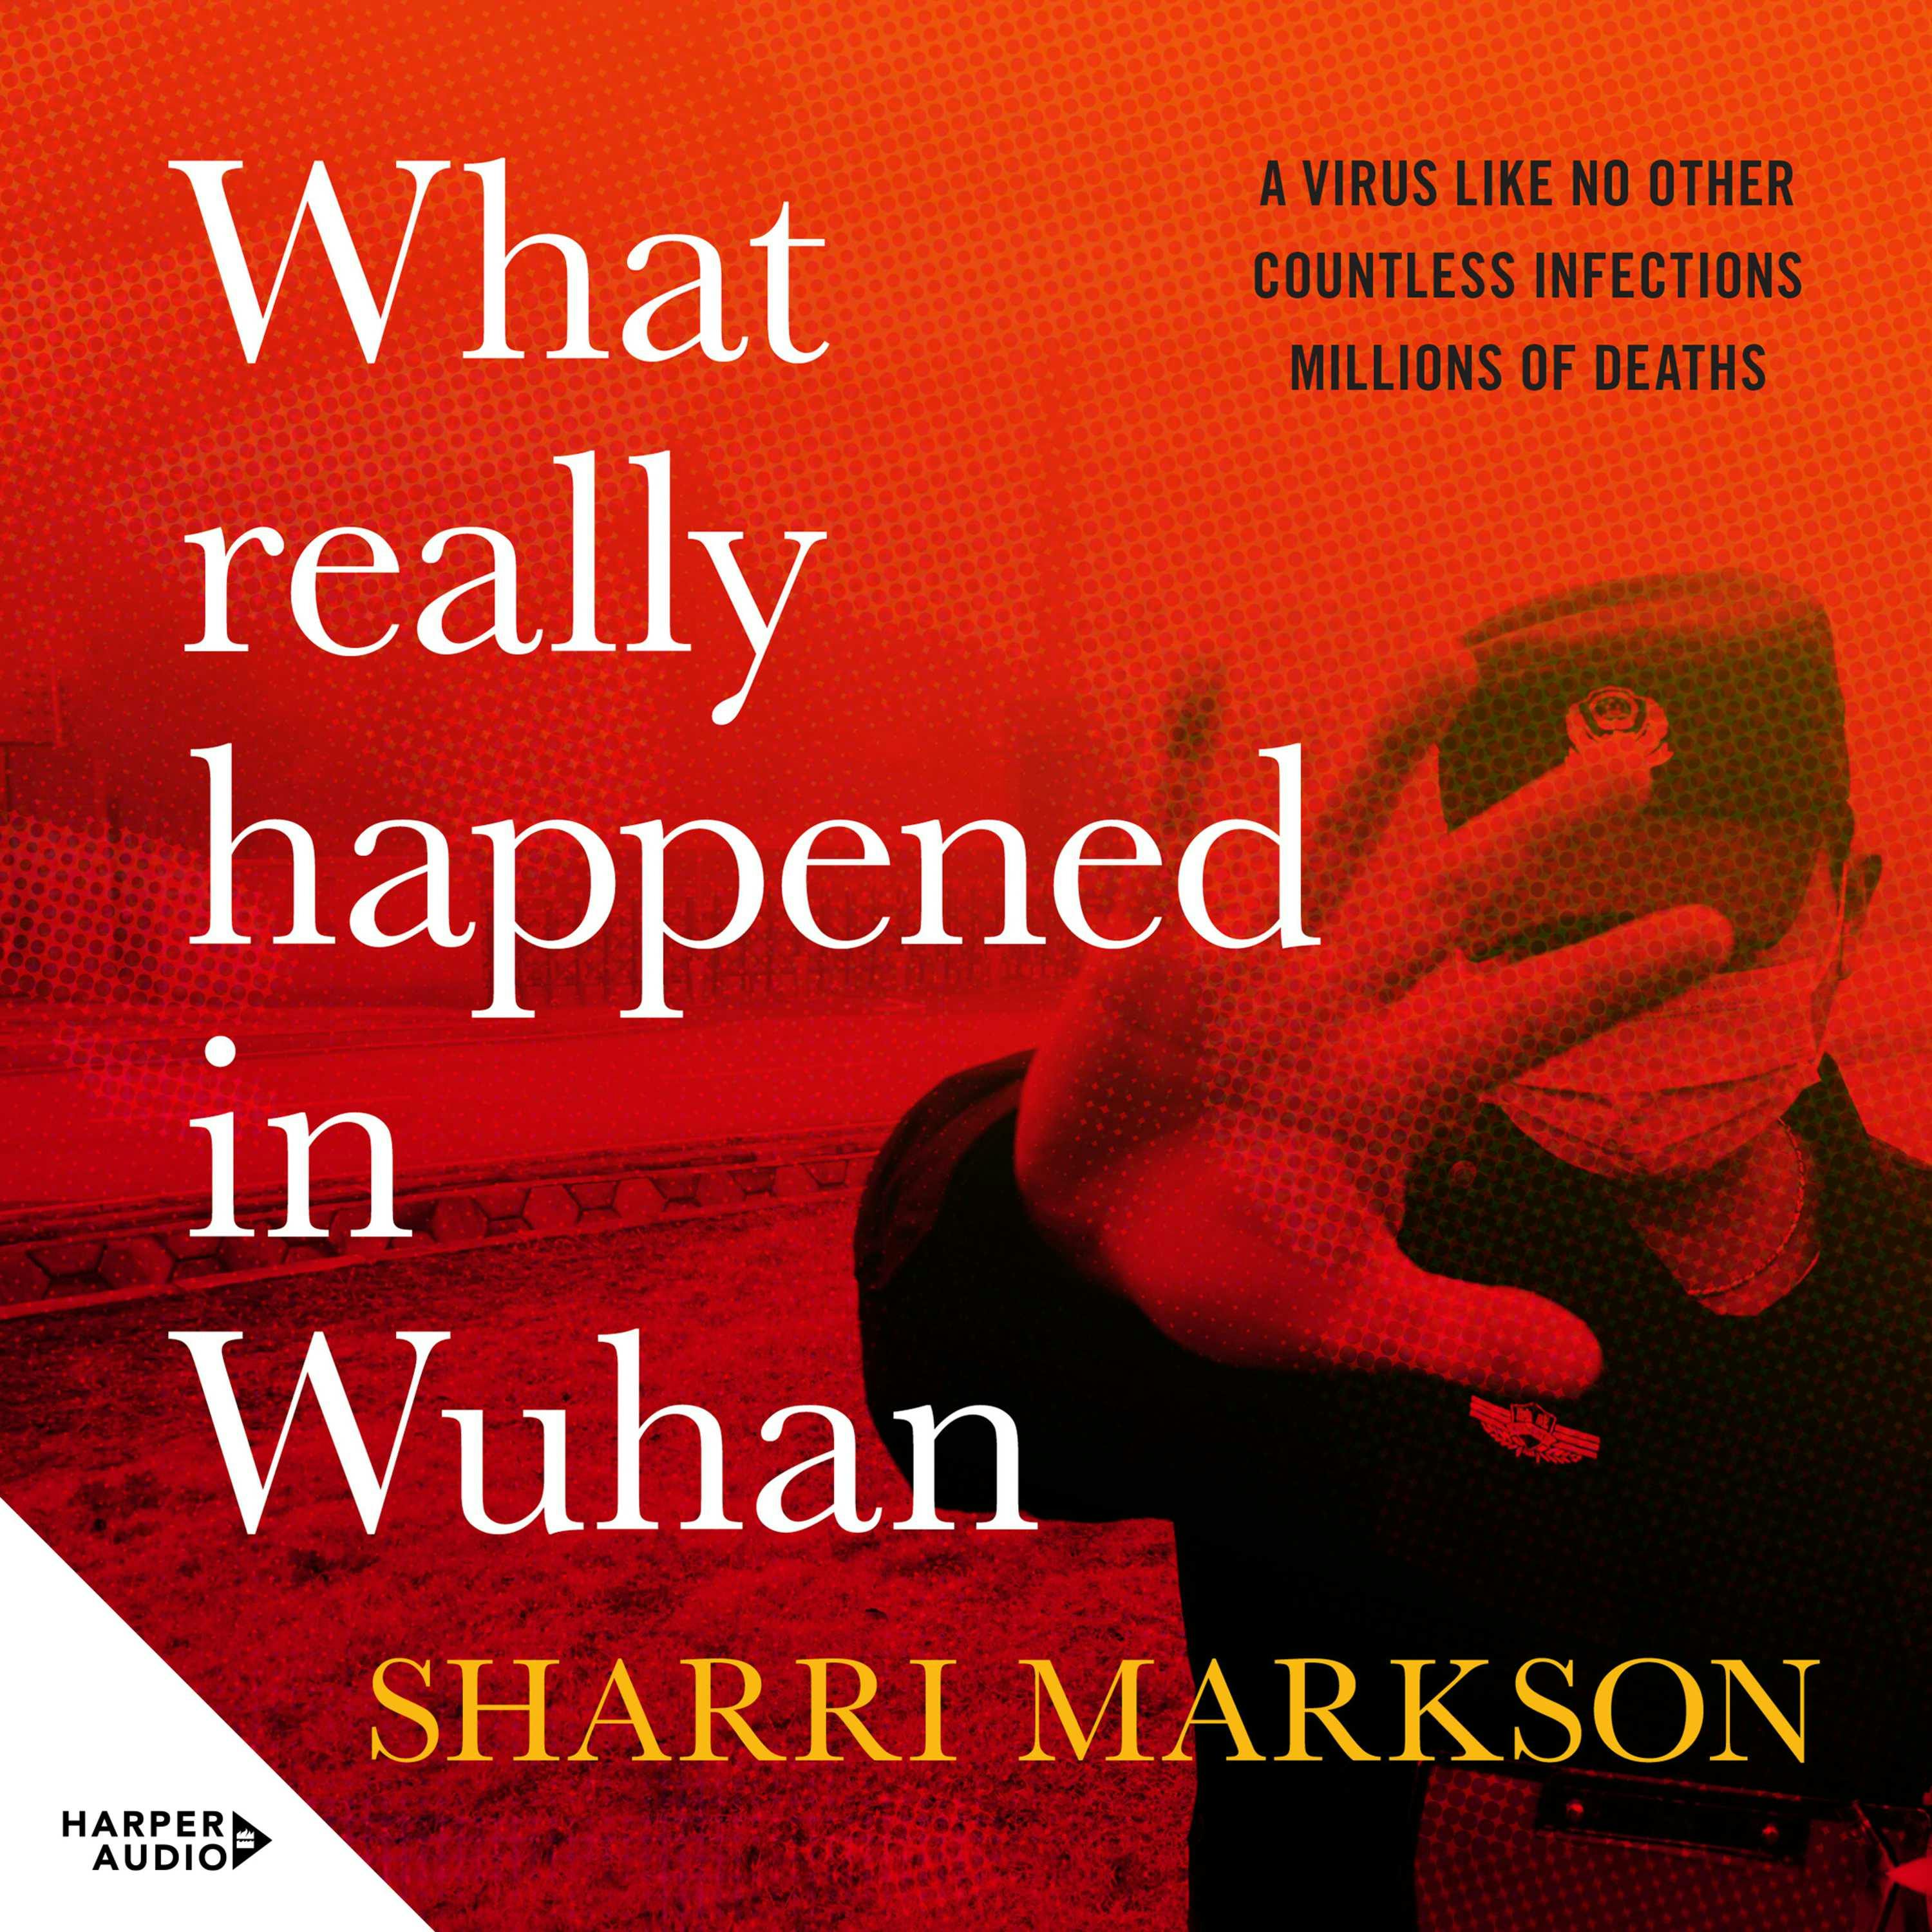 What Really Happened In Wuhan: A Virus Like No Other, Countless Infections, Millions of Deaths - Sharri Markson